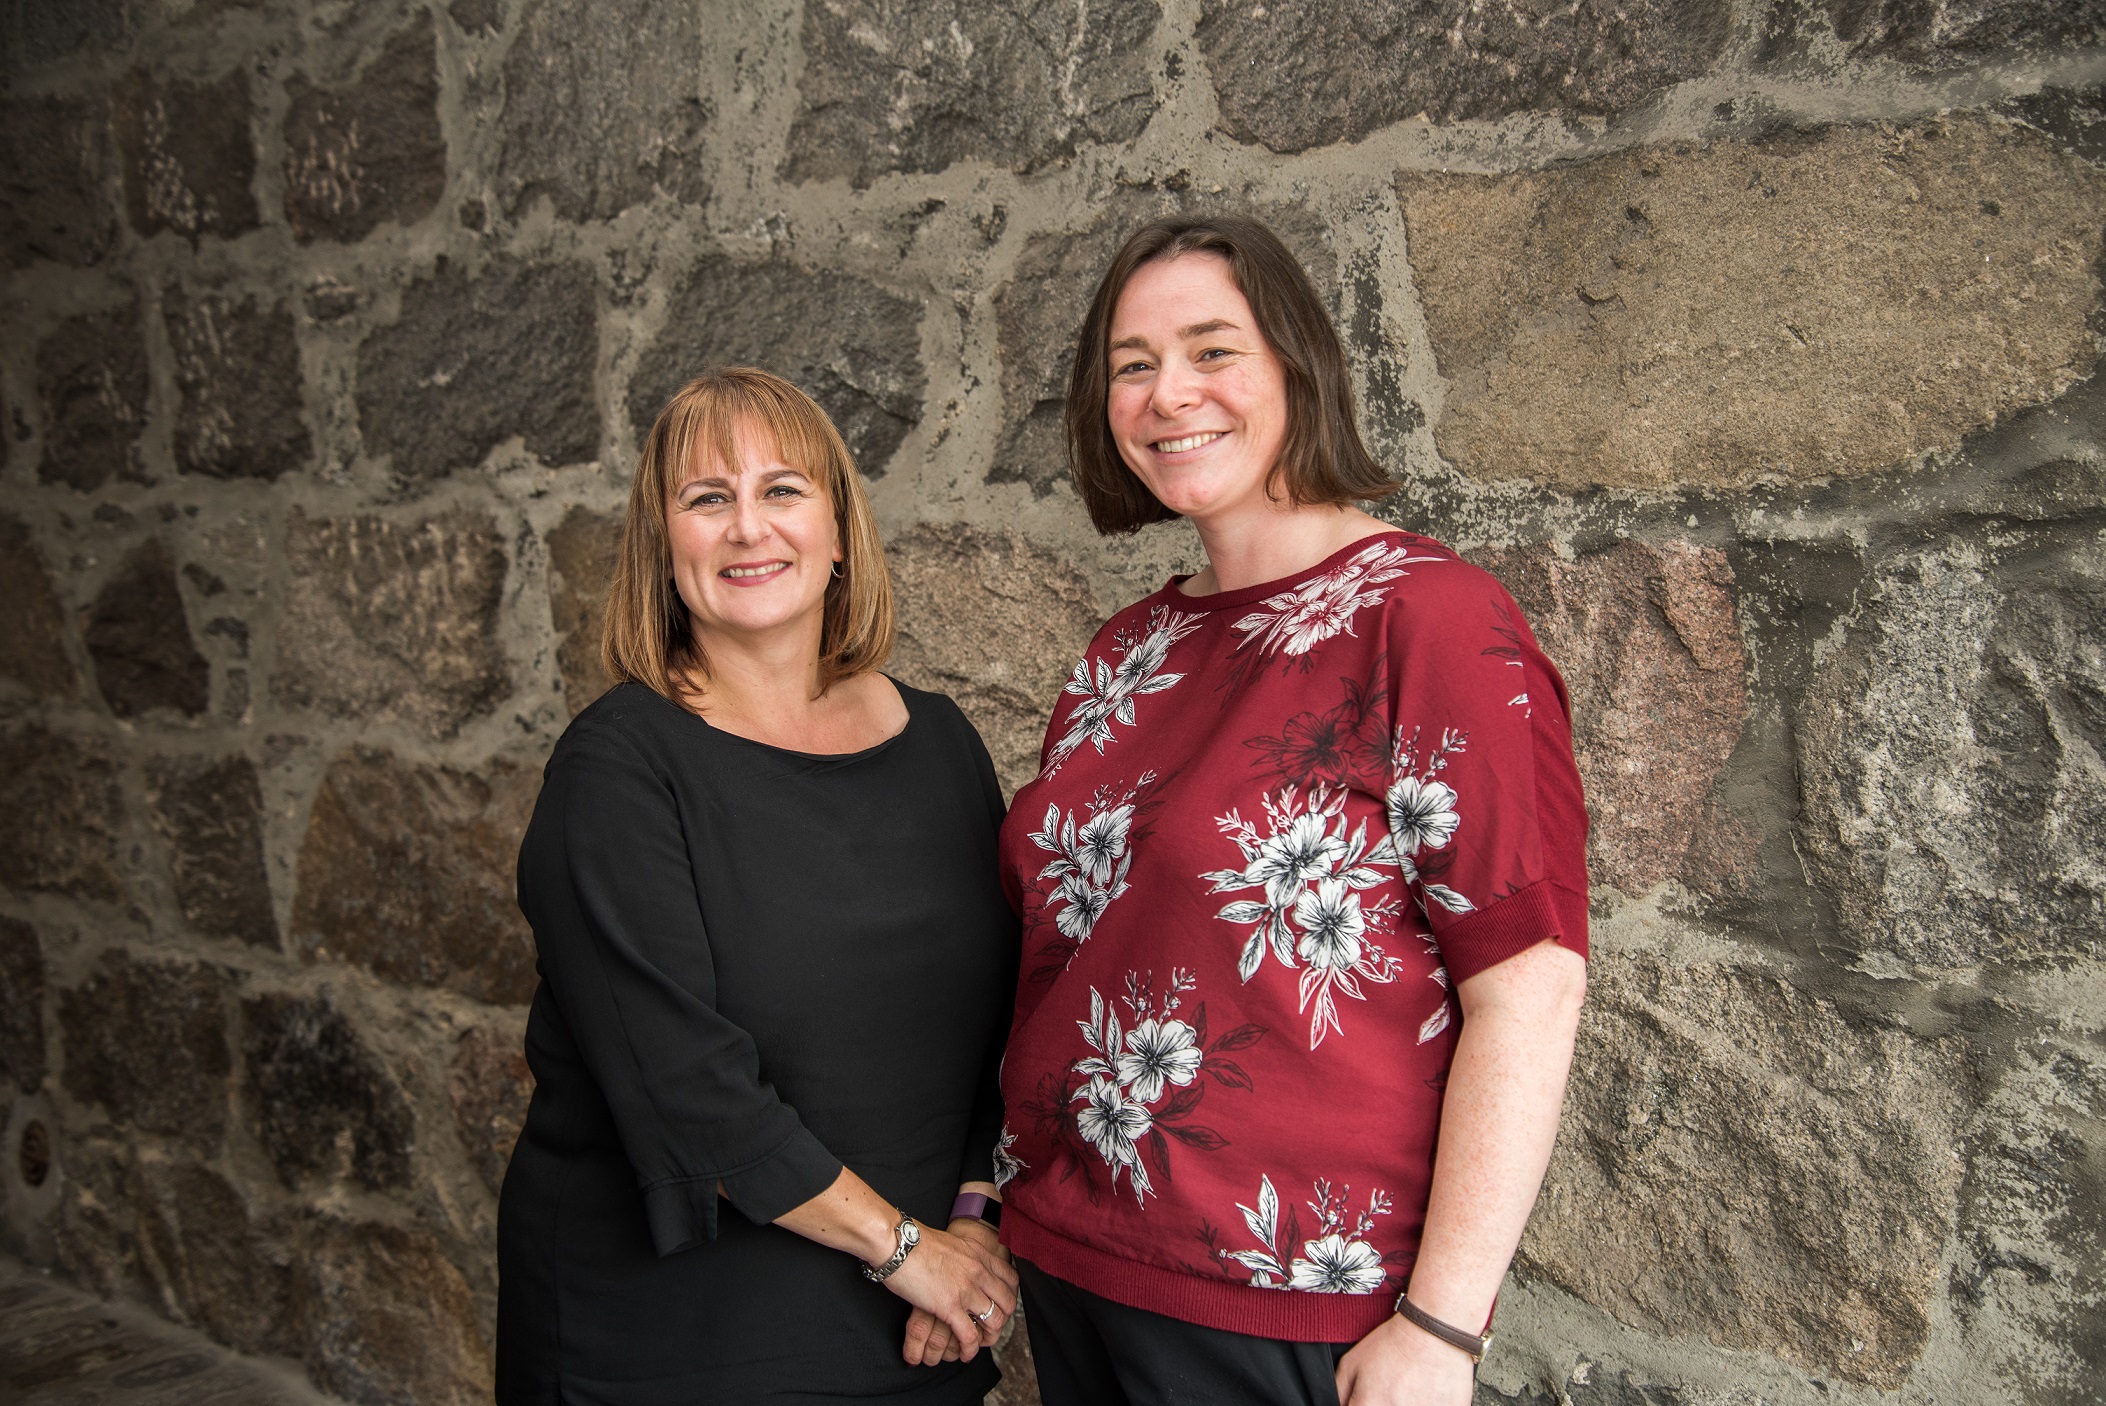 Co-founders Emma Barker and Gillian Tierney